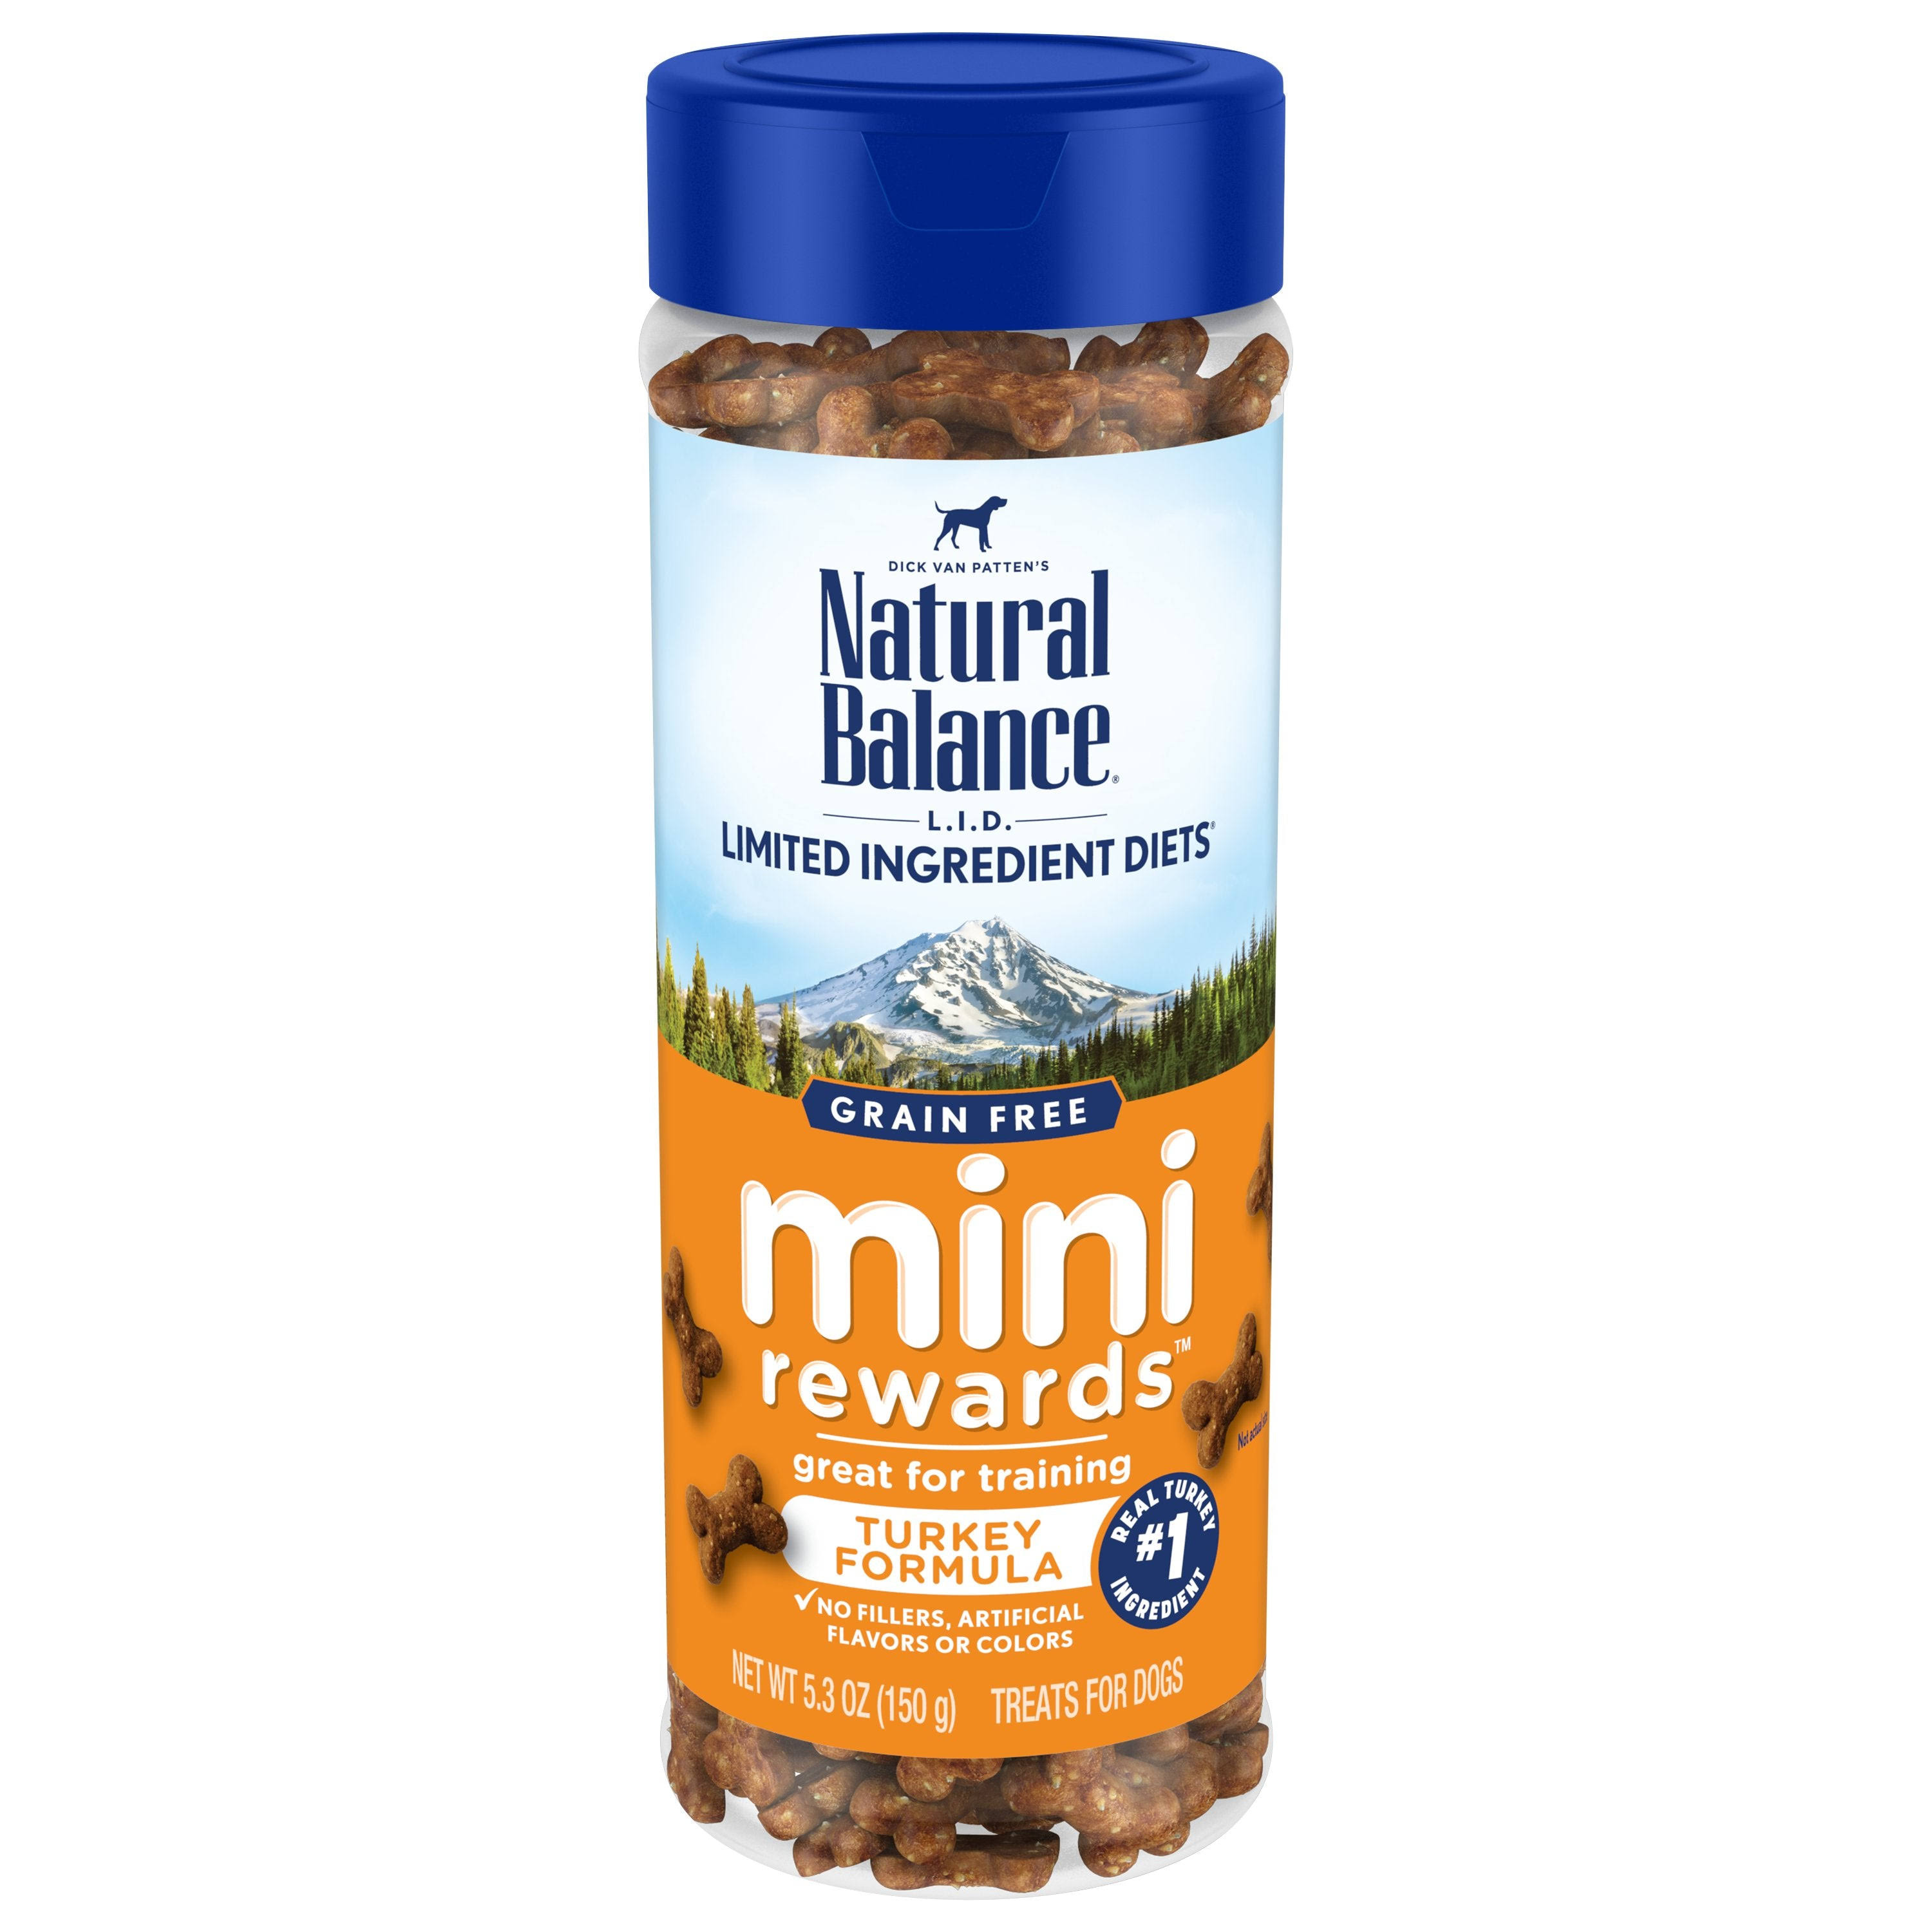 Natural Balance Limited Ingredient Mini-Rewards Turkey Grain-Free Dog Training Treats for Dogs | 5.3-oz. Canister